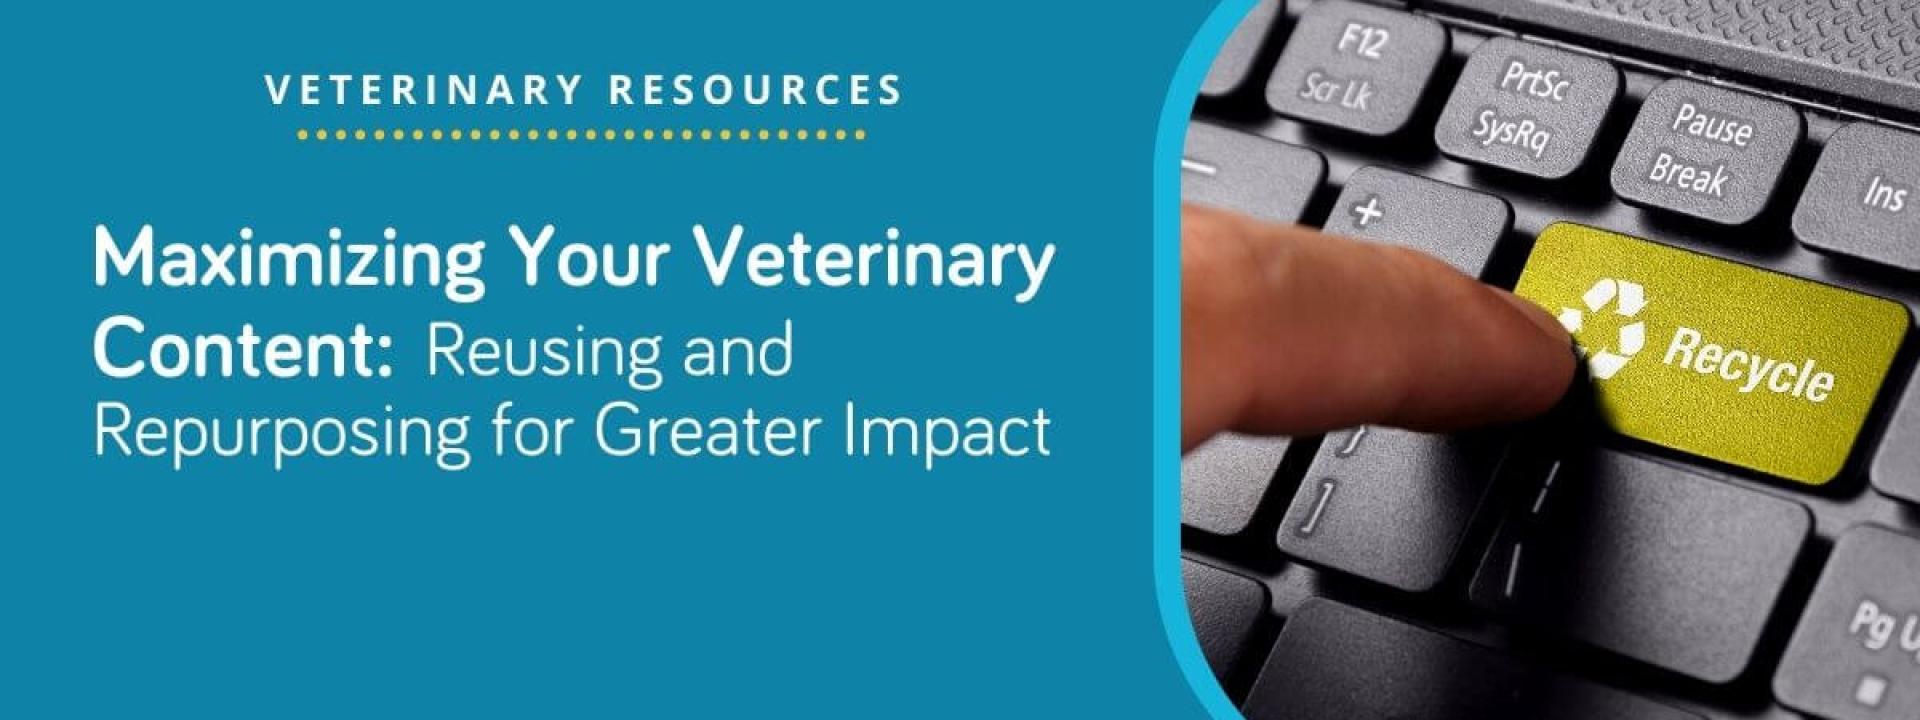 Maximizing Your Veterinary Content: Reusing and Repurposing for Greater Impact